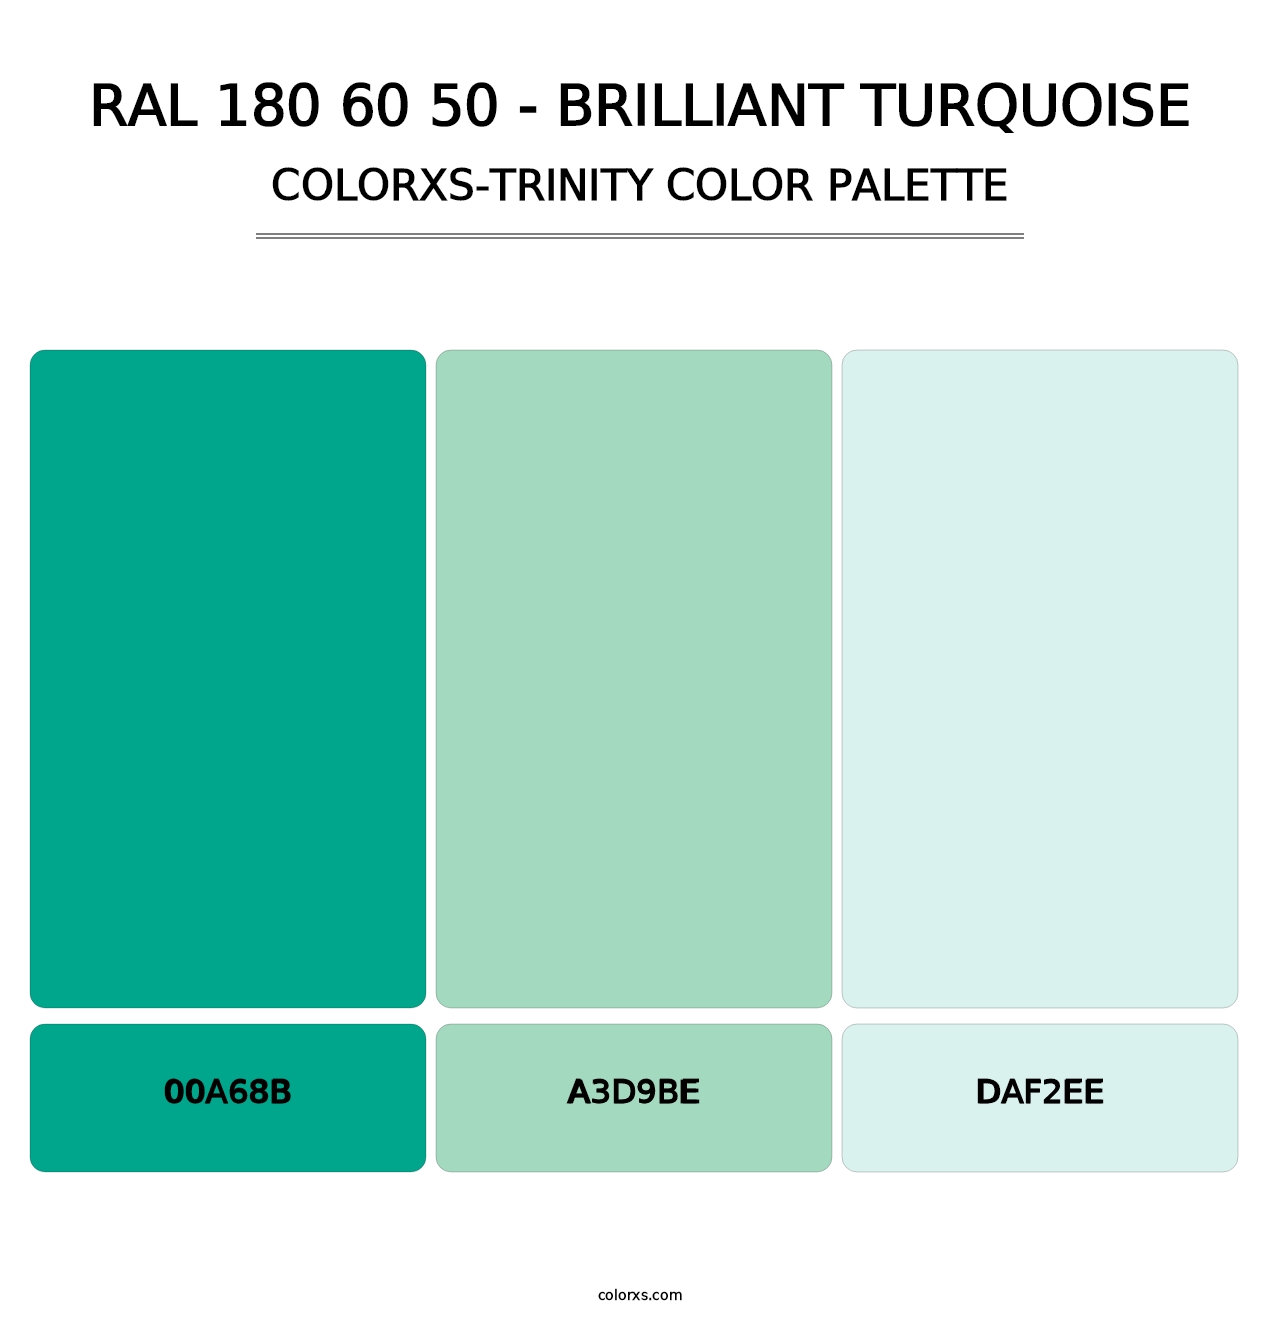 RAL 180 60 50 - Brilliant Turquoise - Colorxs Trinity Palette